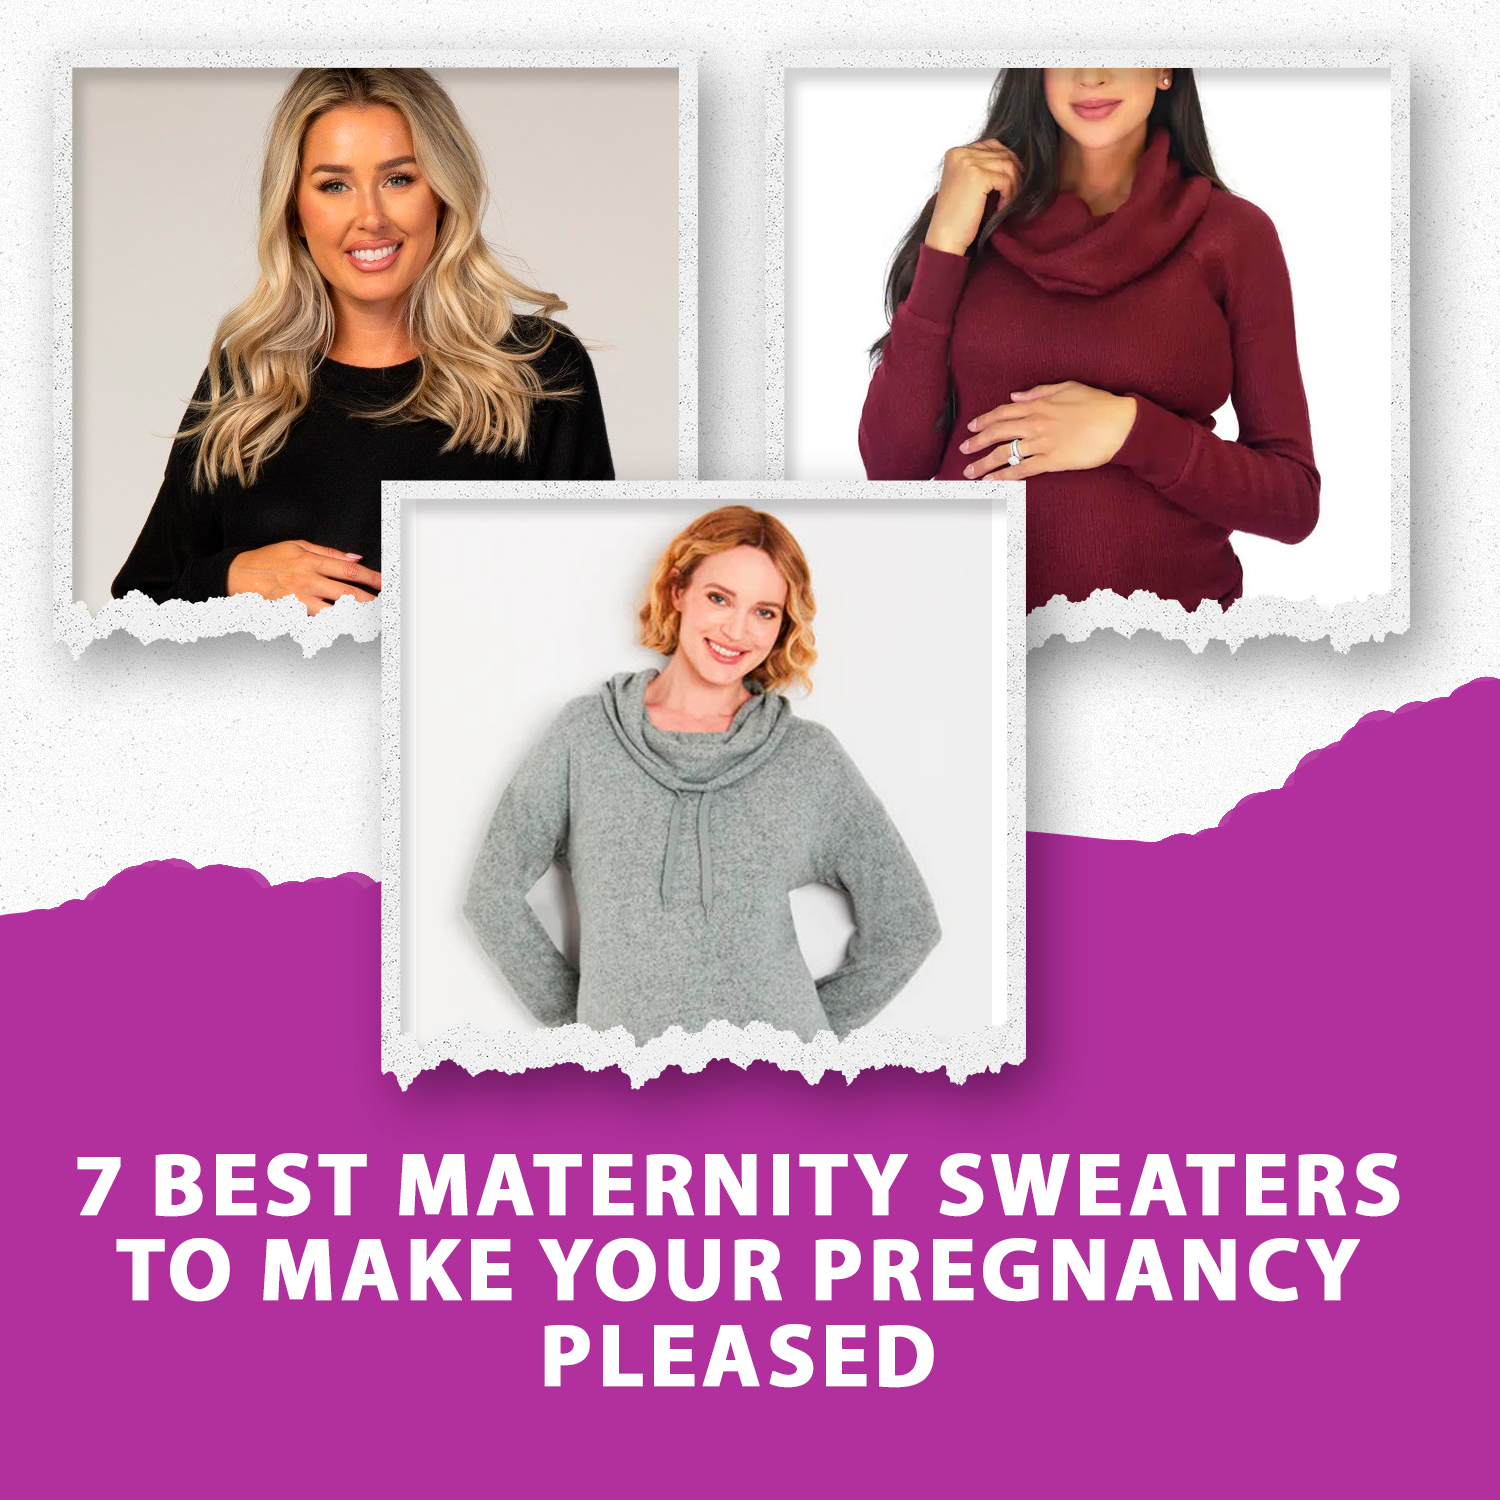 7 Best Maternity Sweaters To Make Your Pregnancy Pleased